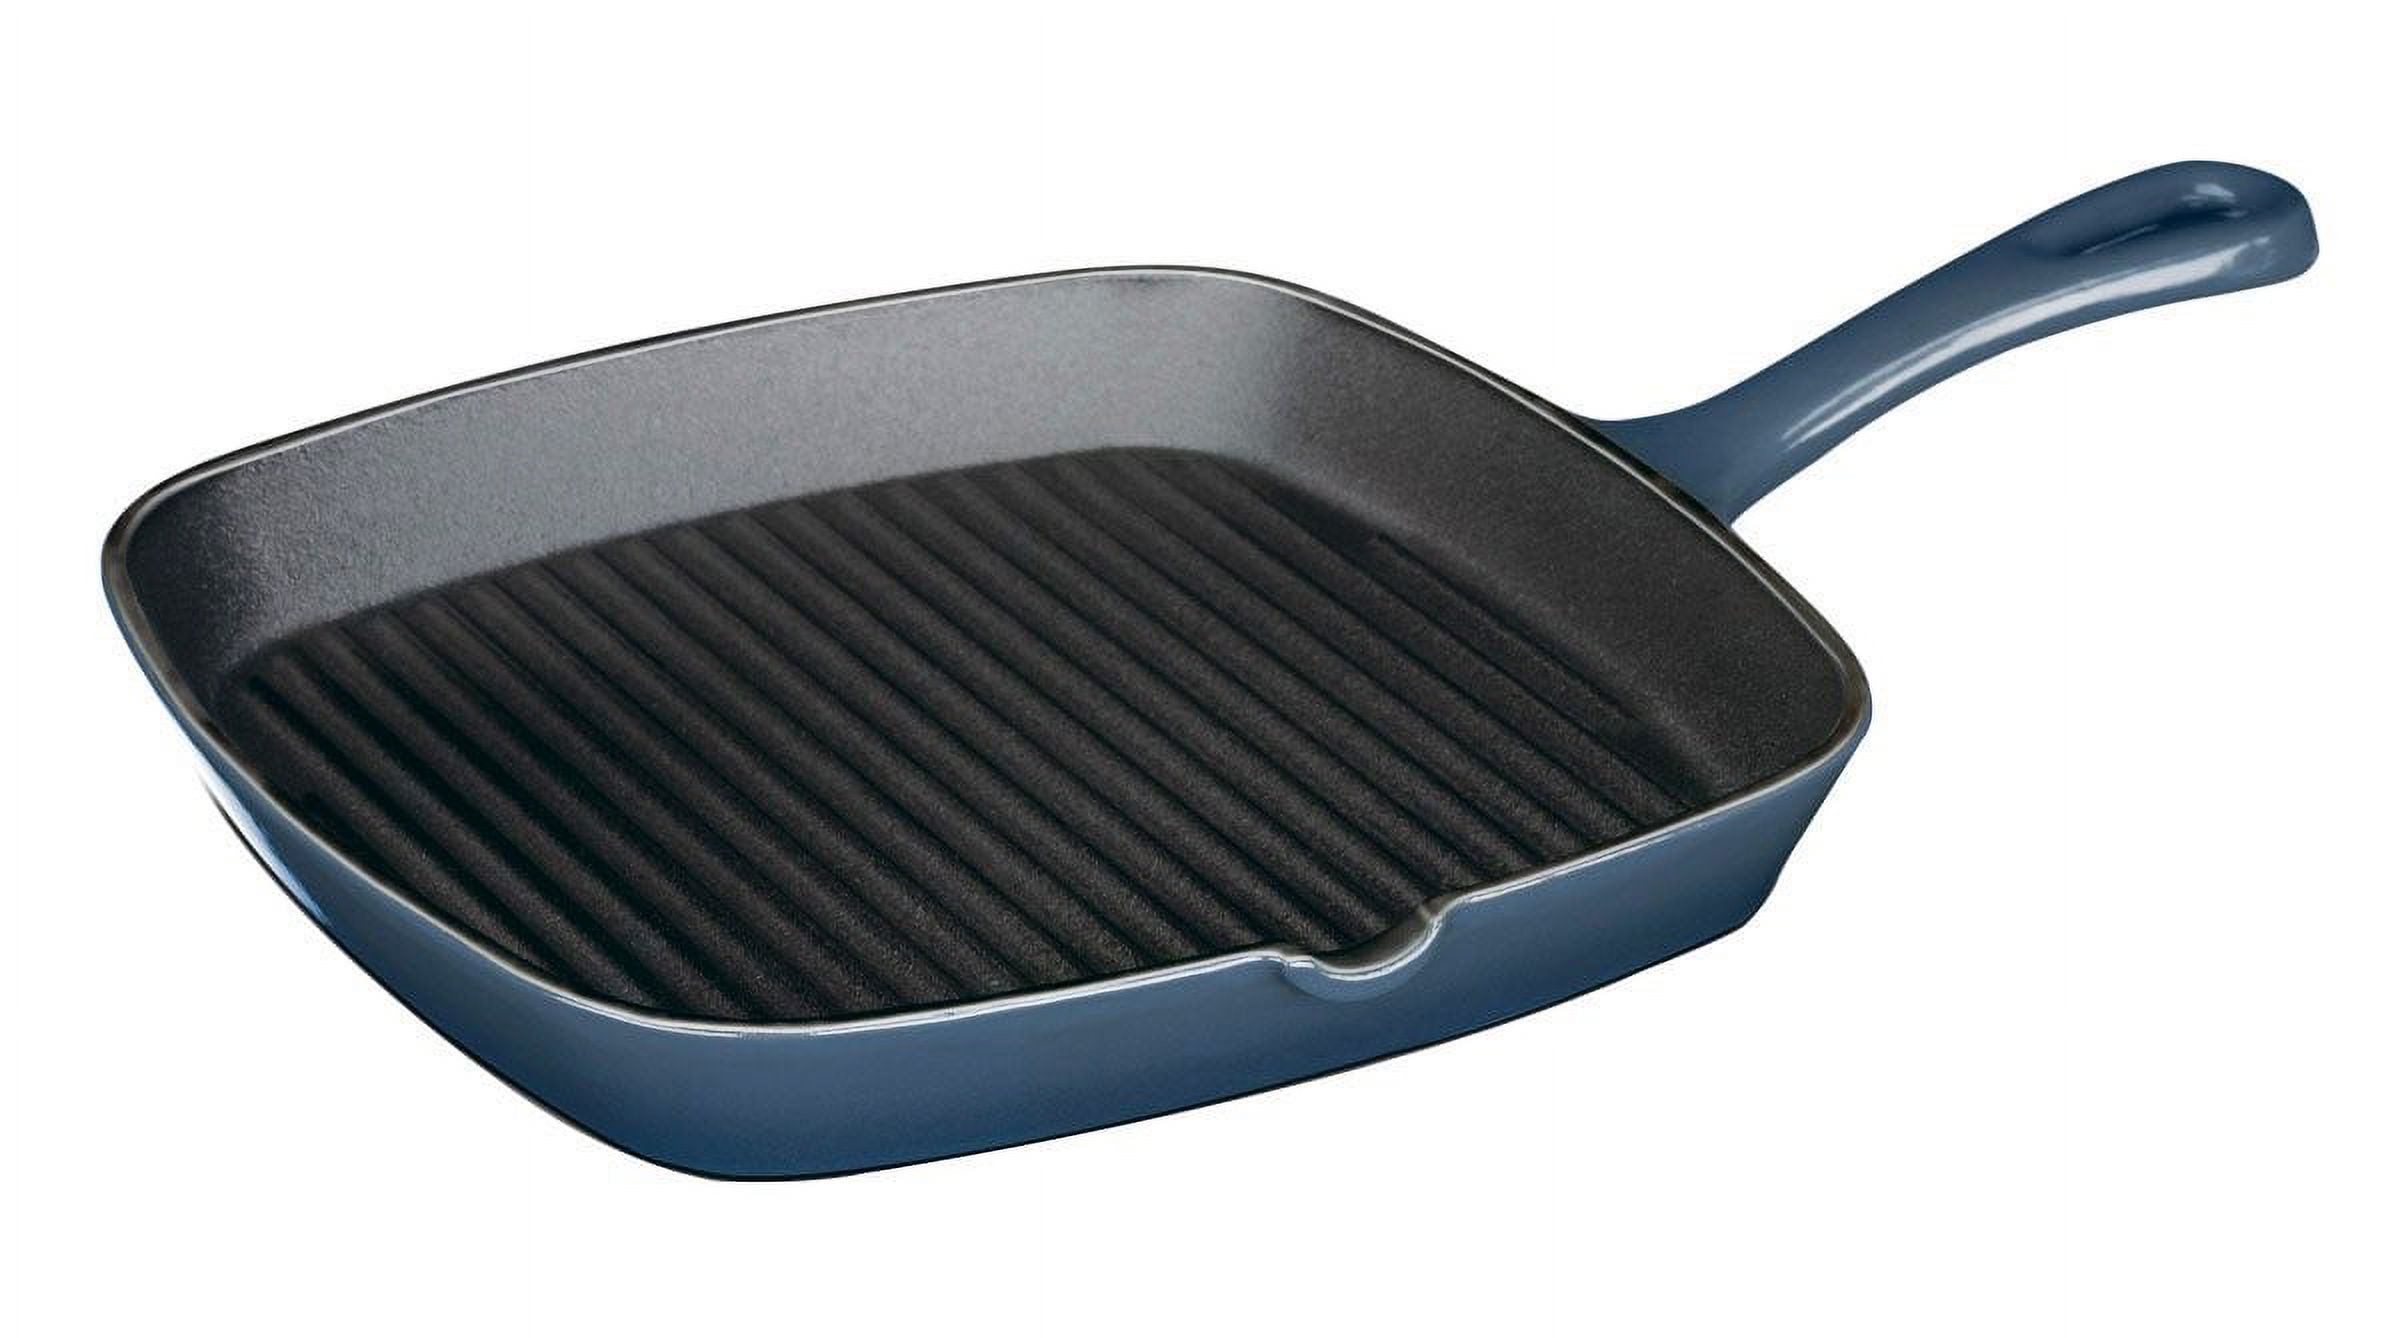 Cuisinart Chef'S Classic Enameled Cast Iron 9.25" Square Grill Pan-Provencal Blue - image 2 of 3